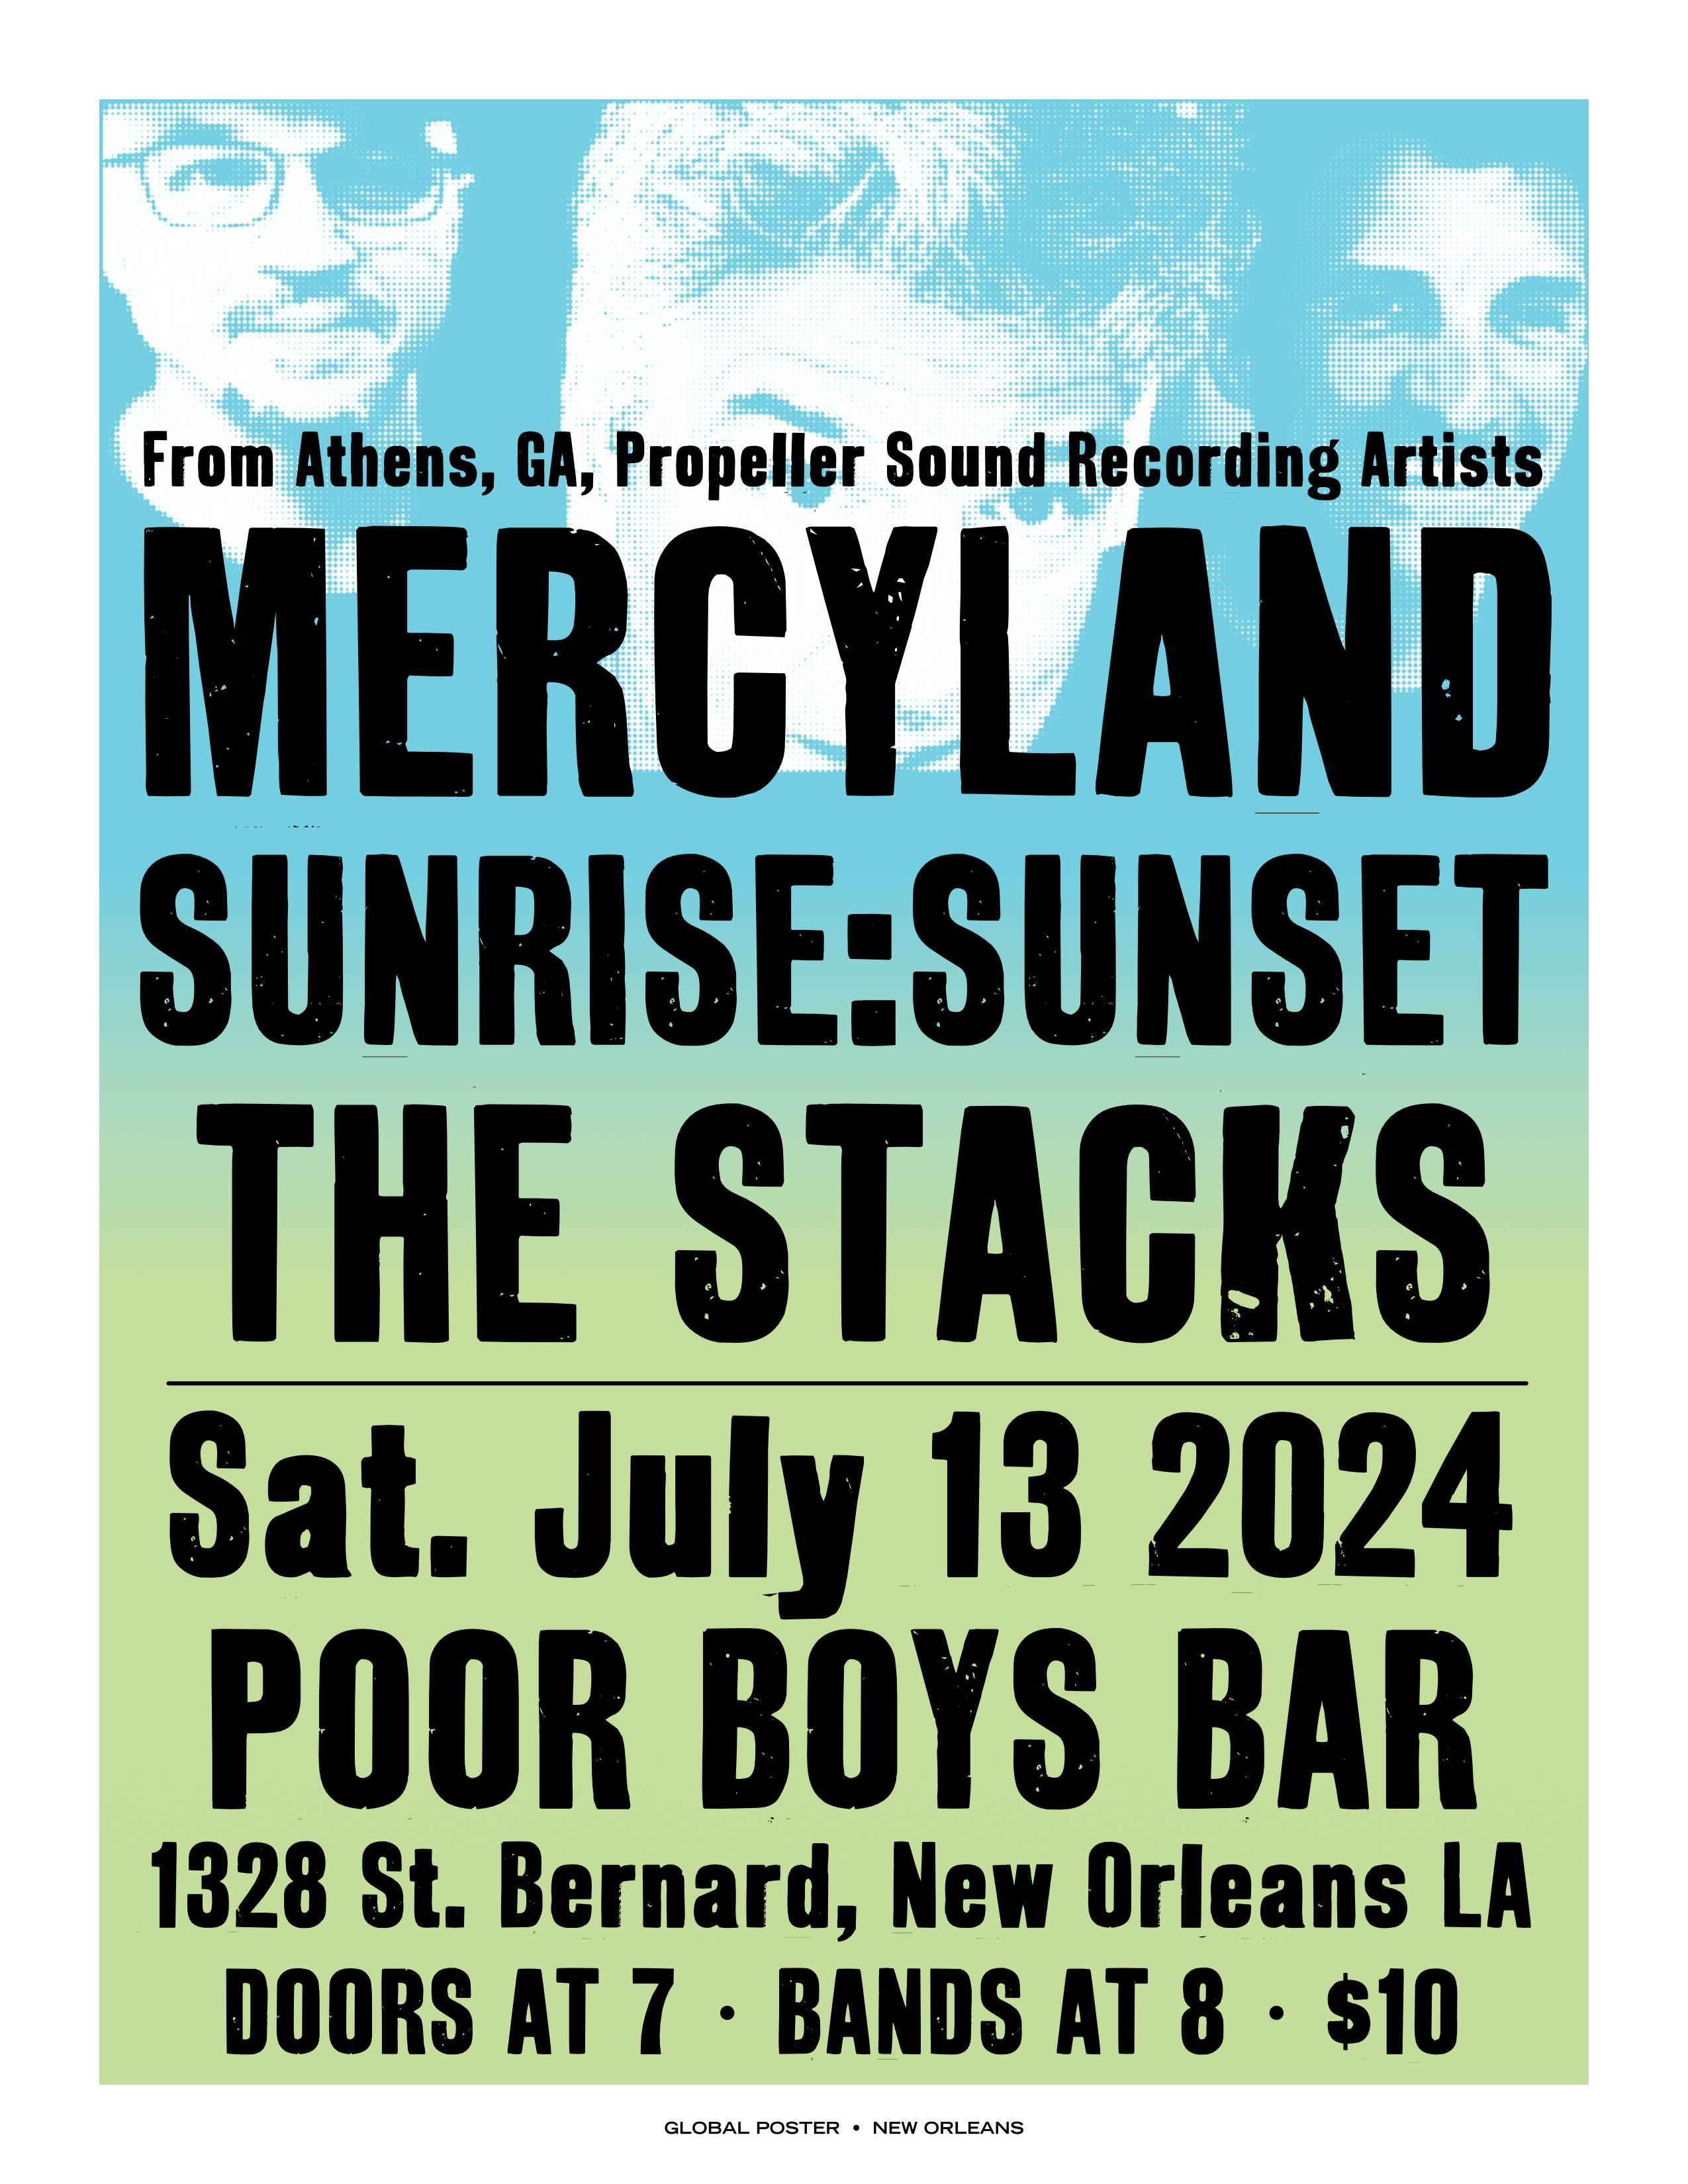 Stacks play Friday, July 13, 2024 at Poor Boys Bar in New Orleans with Mercyland and Sunrise:Sunset.